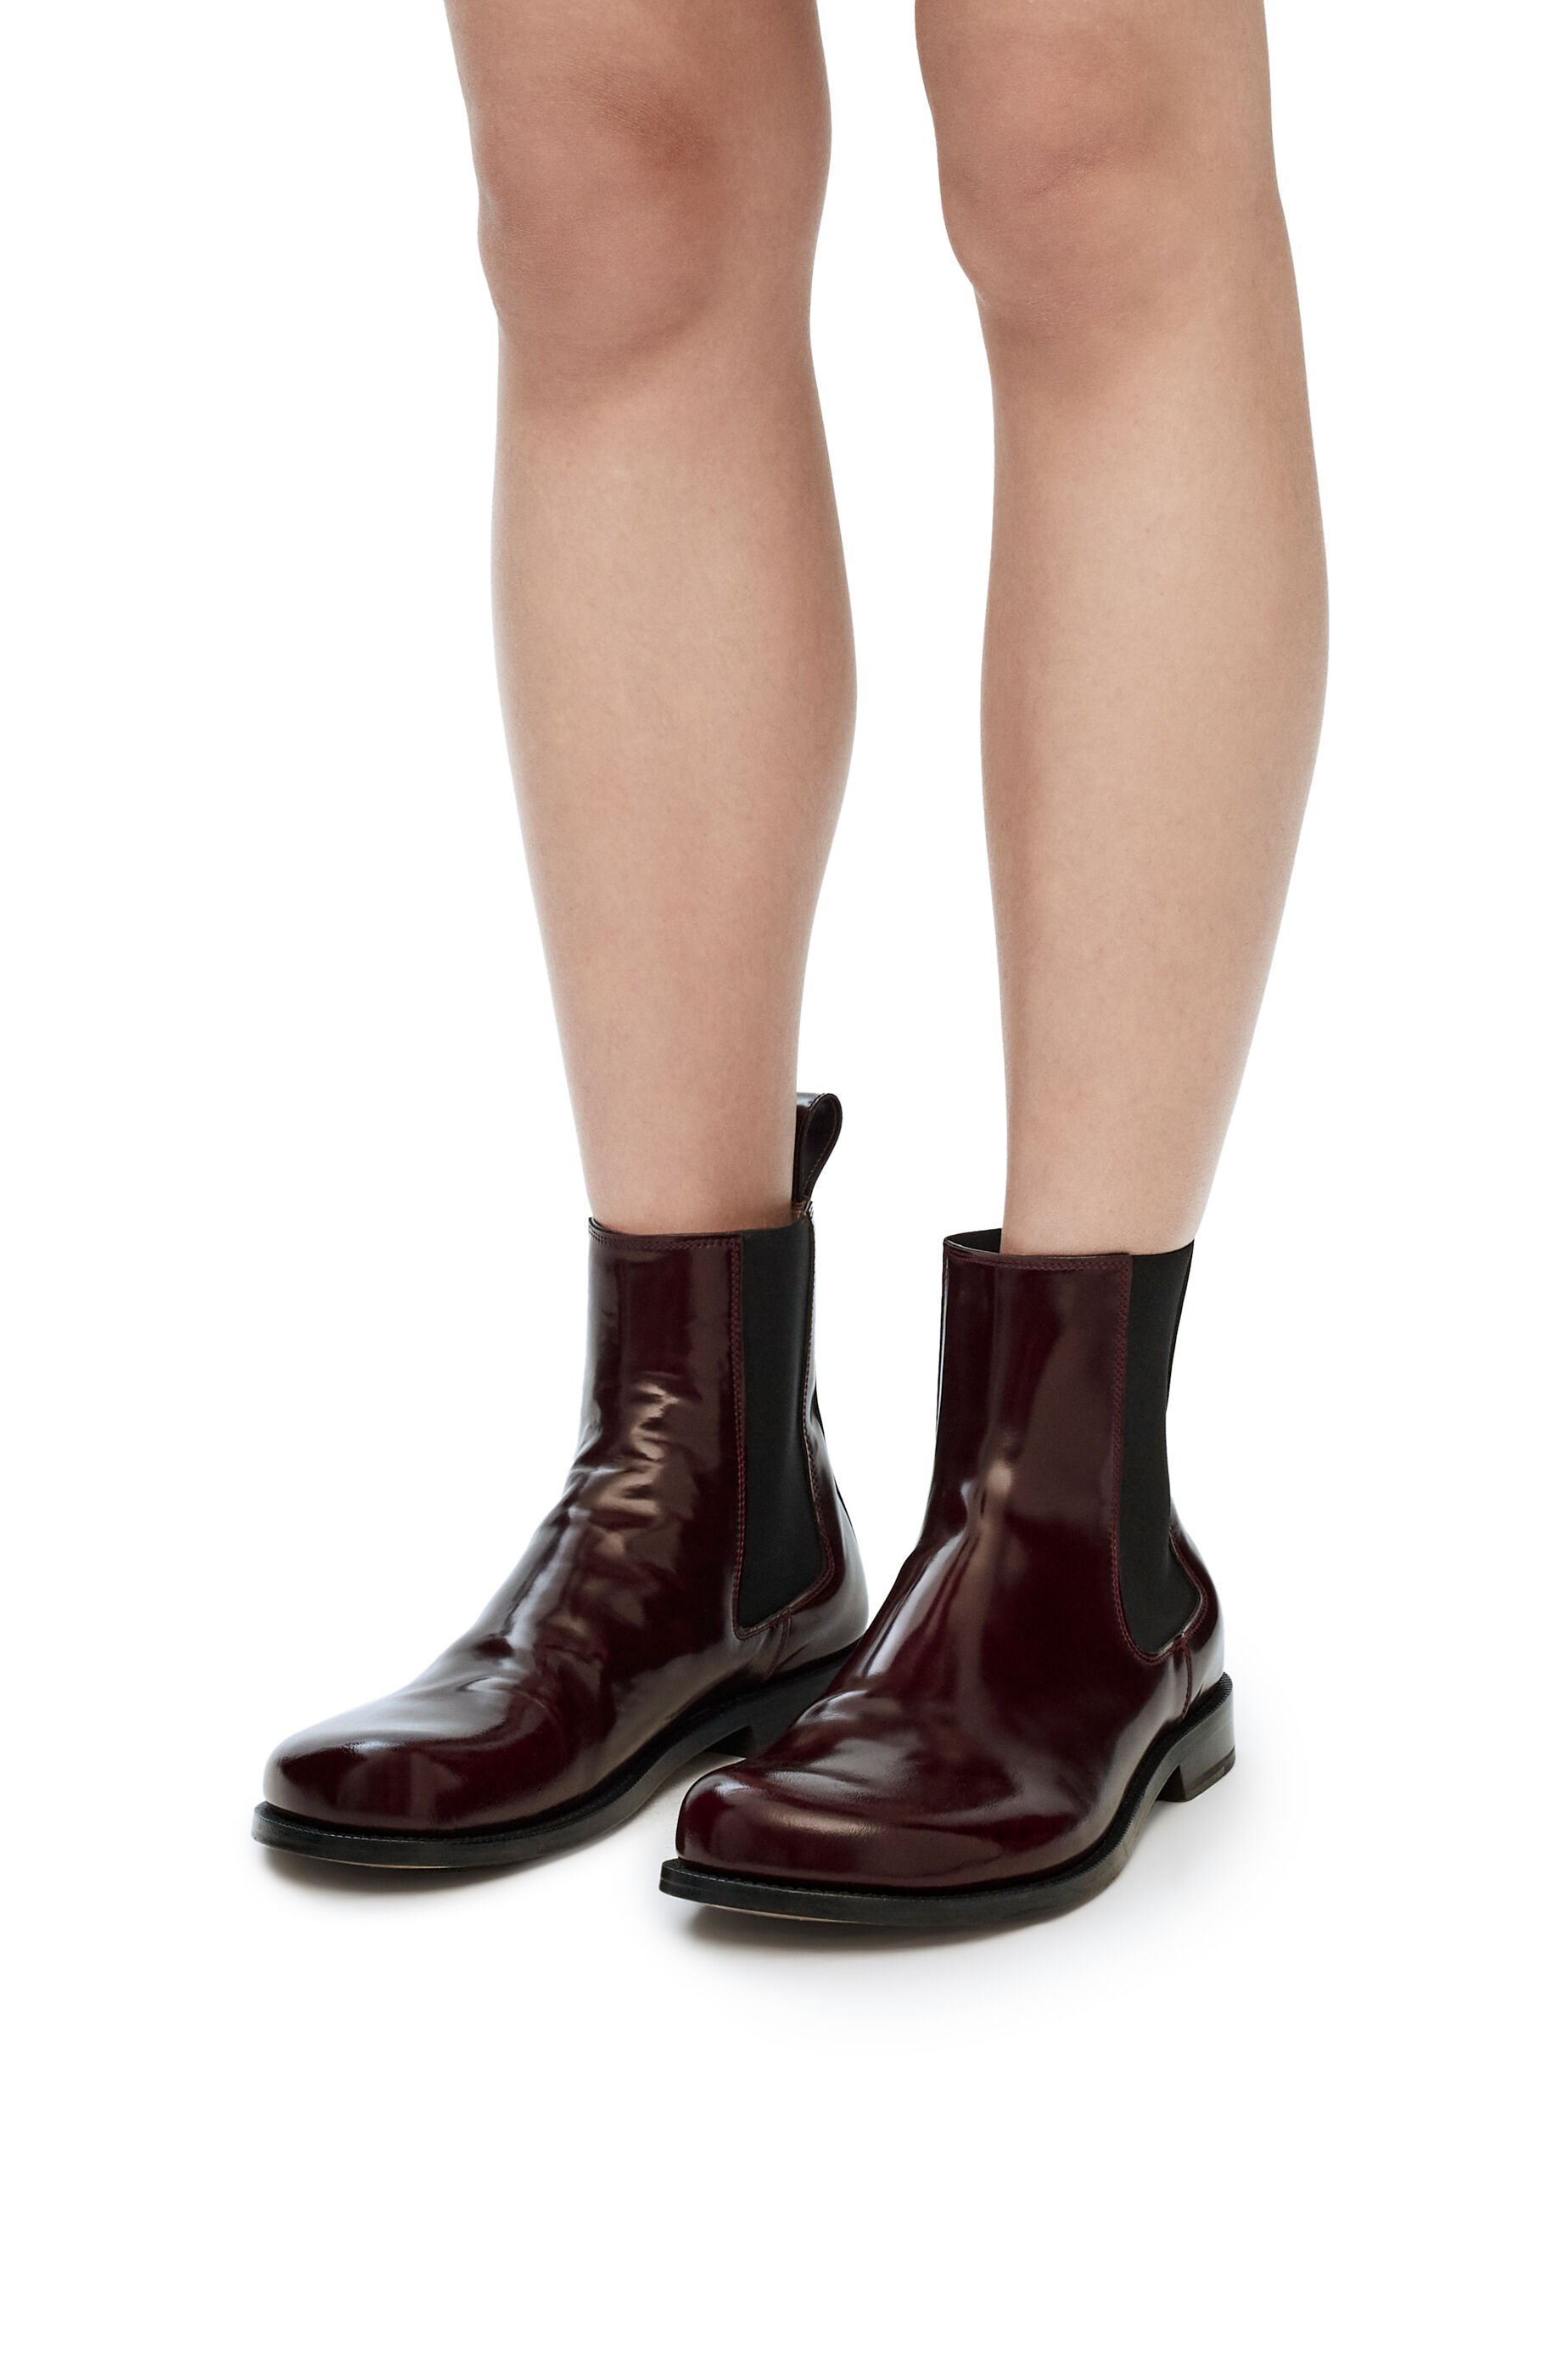 Luxury boots & ankle boots for women - LOEWE